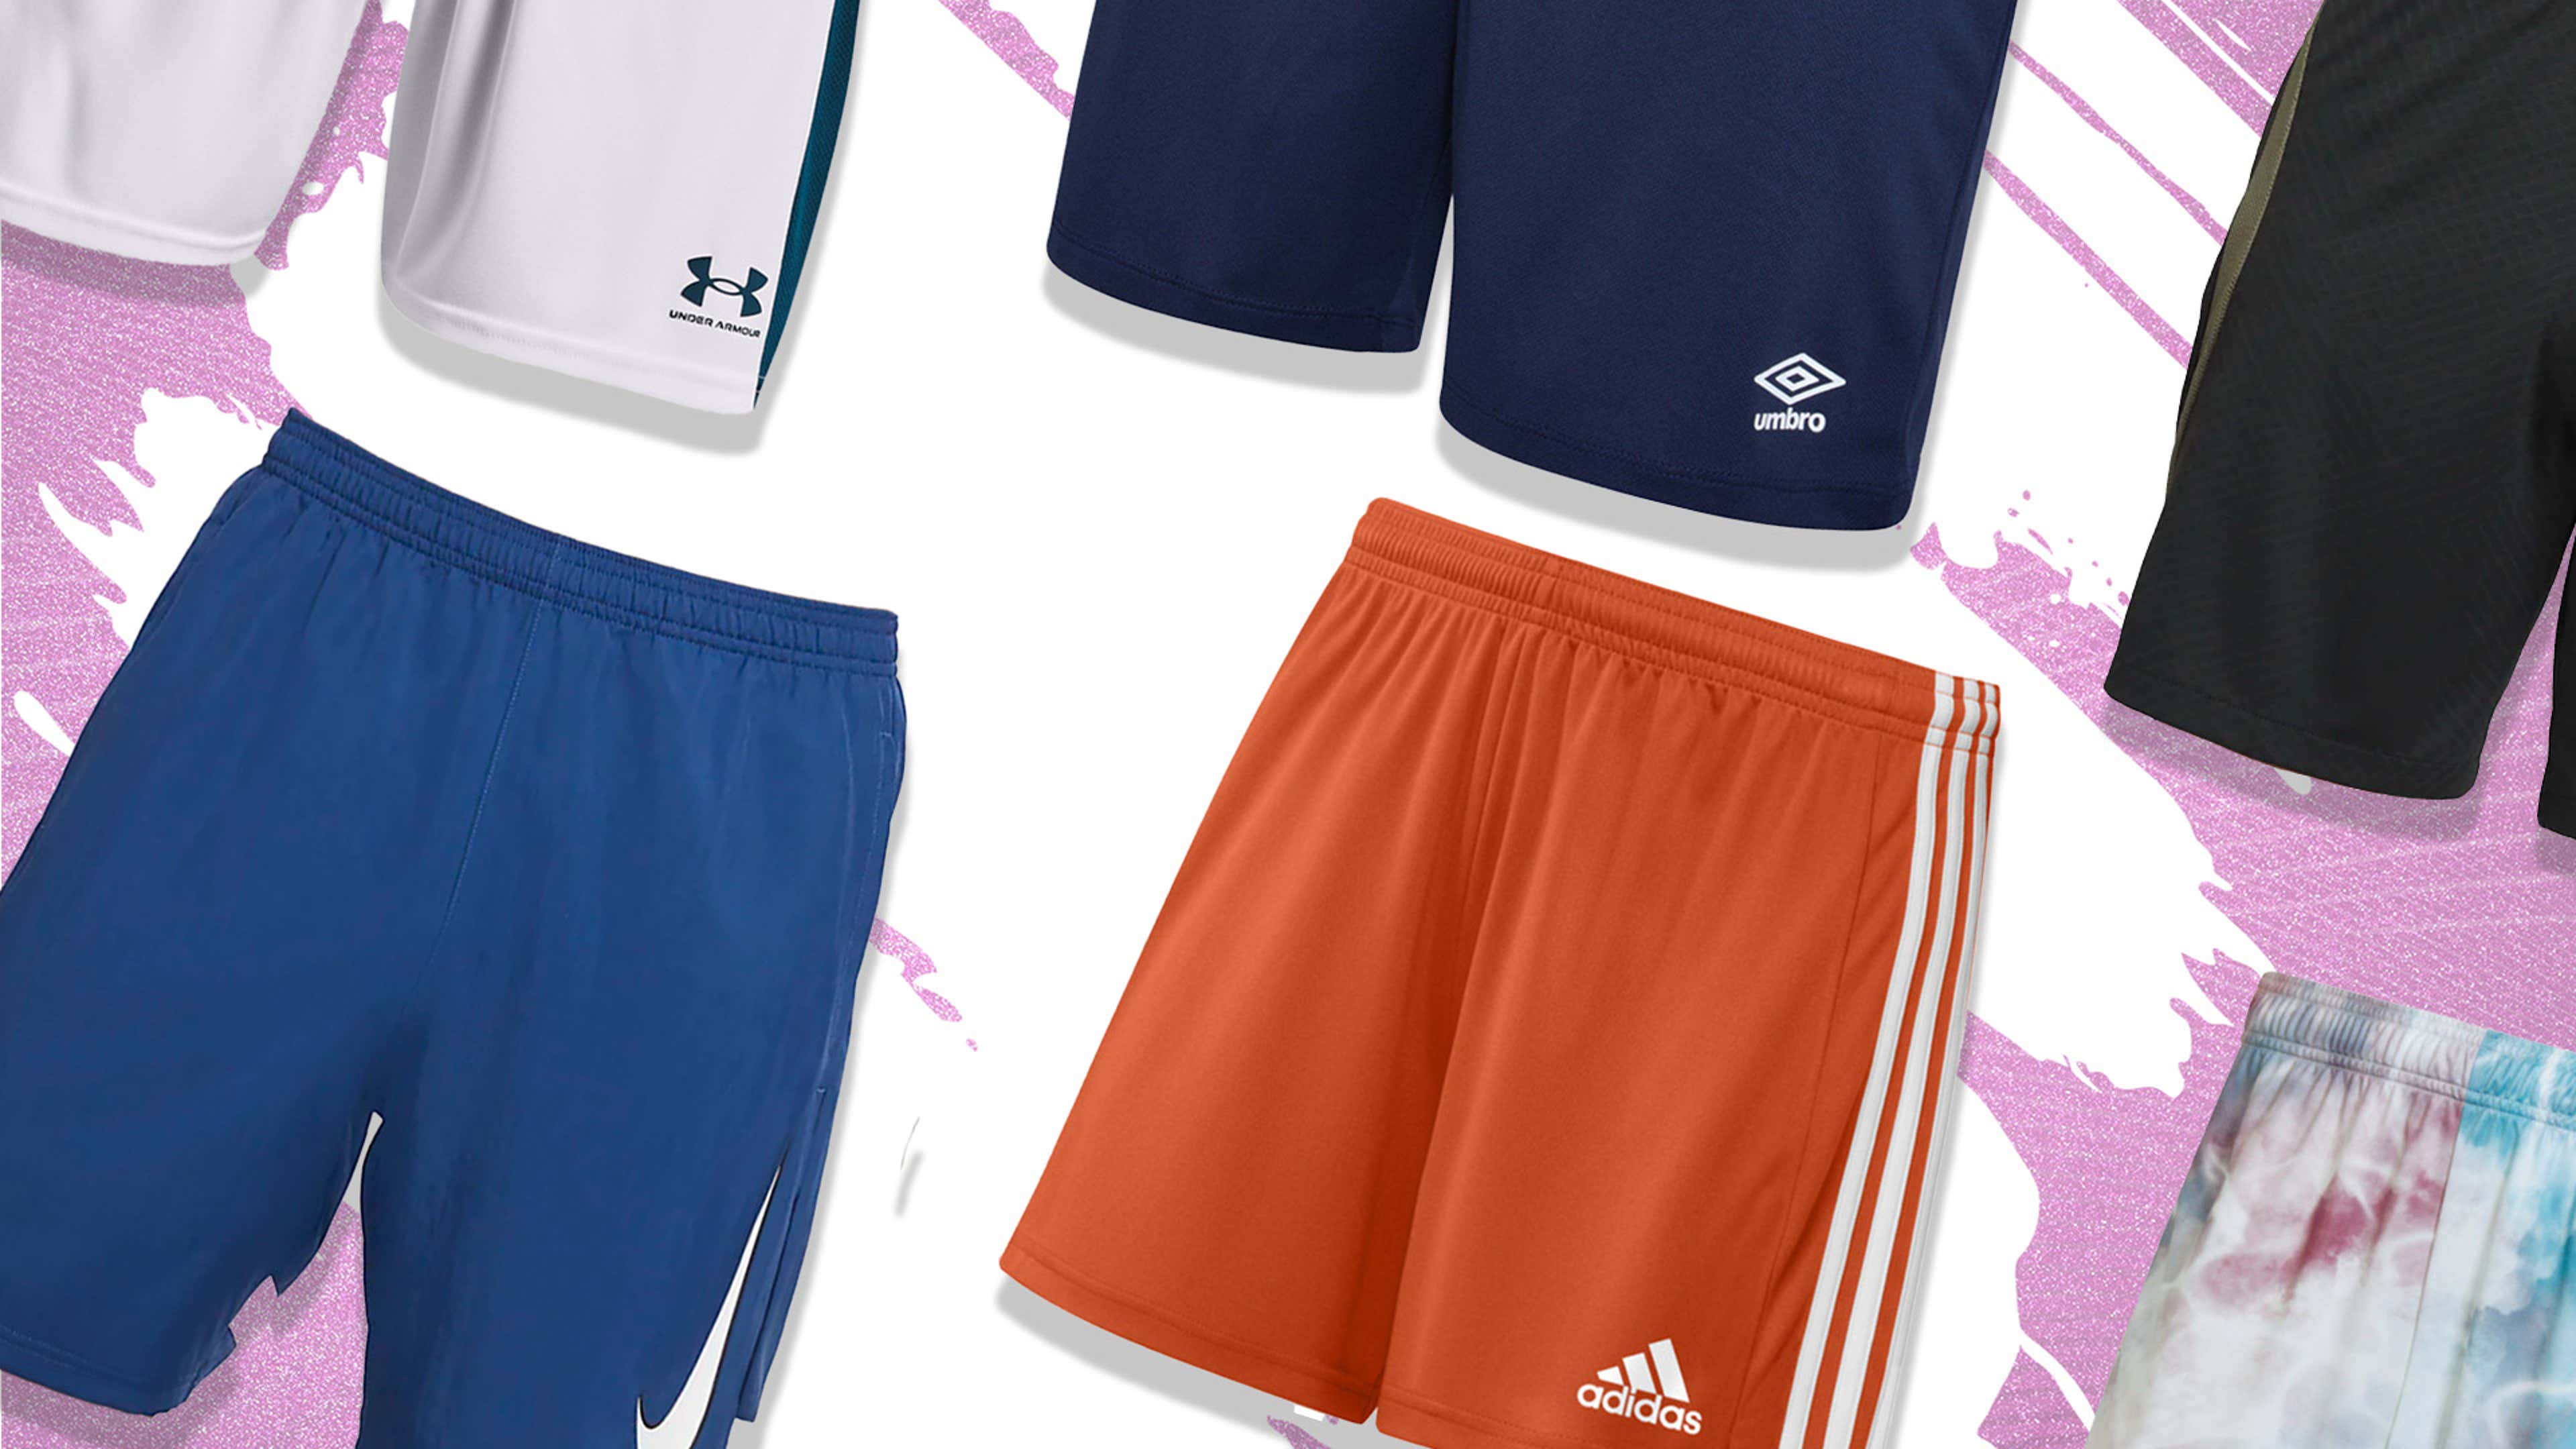 The best men's football shorts you can buy in 2022